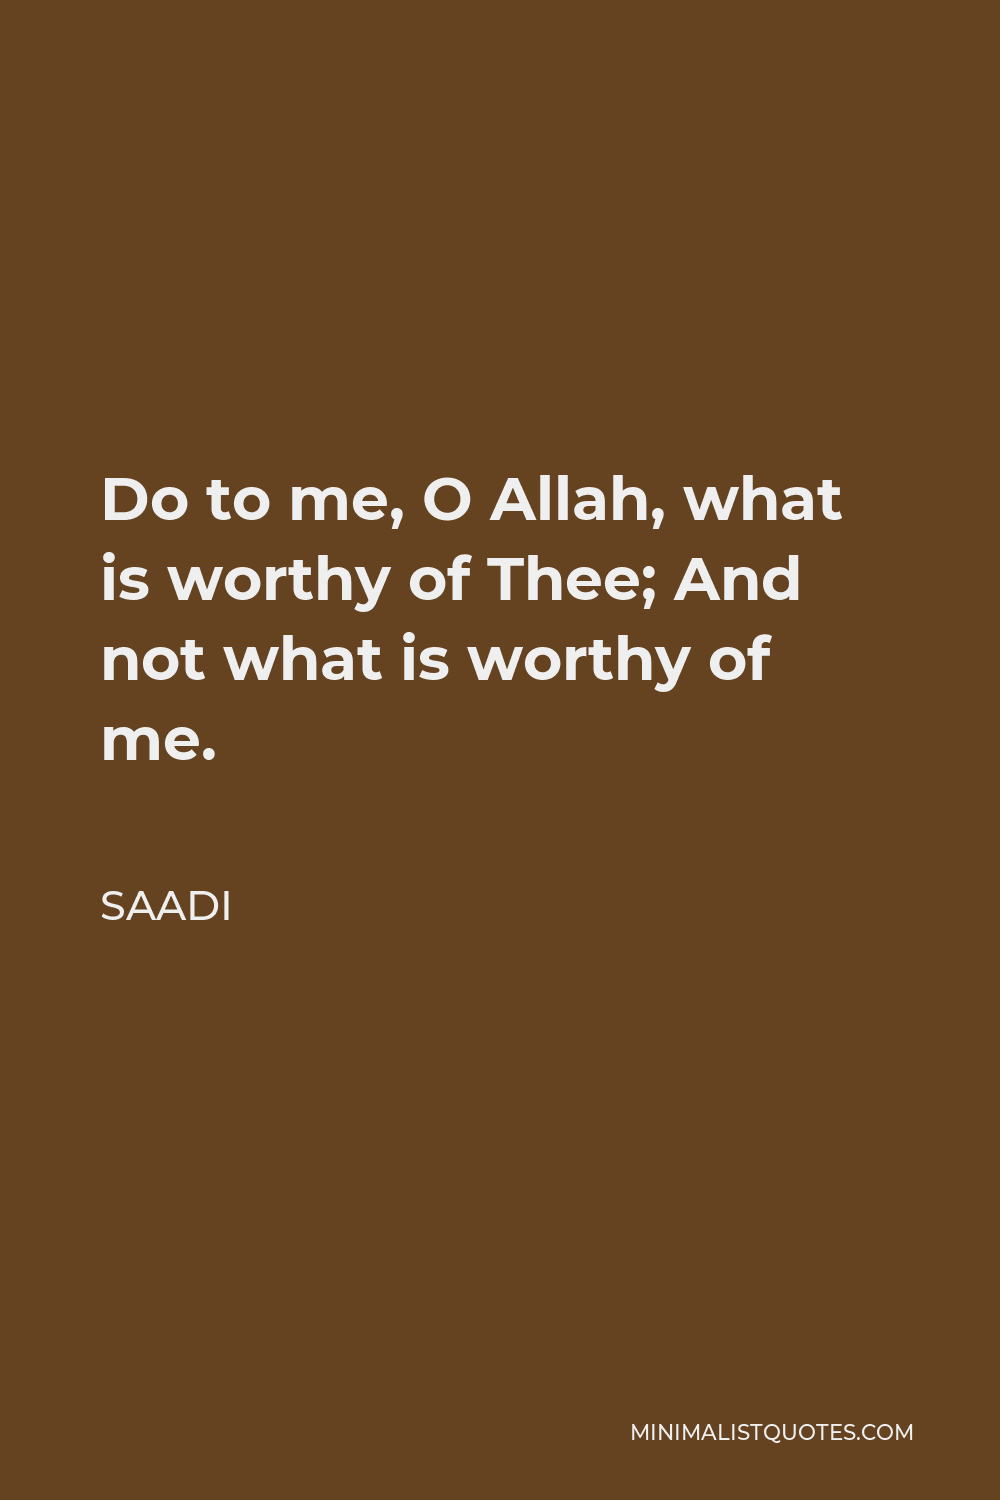 Saadi Quote - Do to me, O Allah, what is worthy of Thee; And not what is worthy of me.